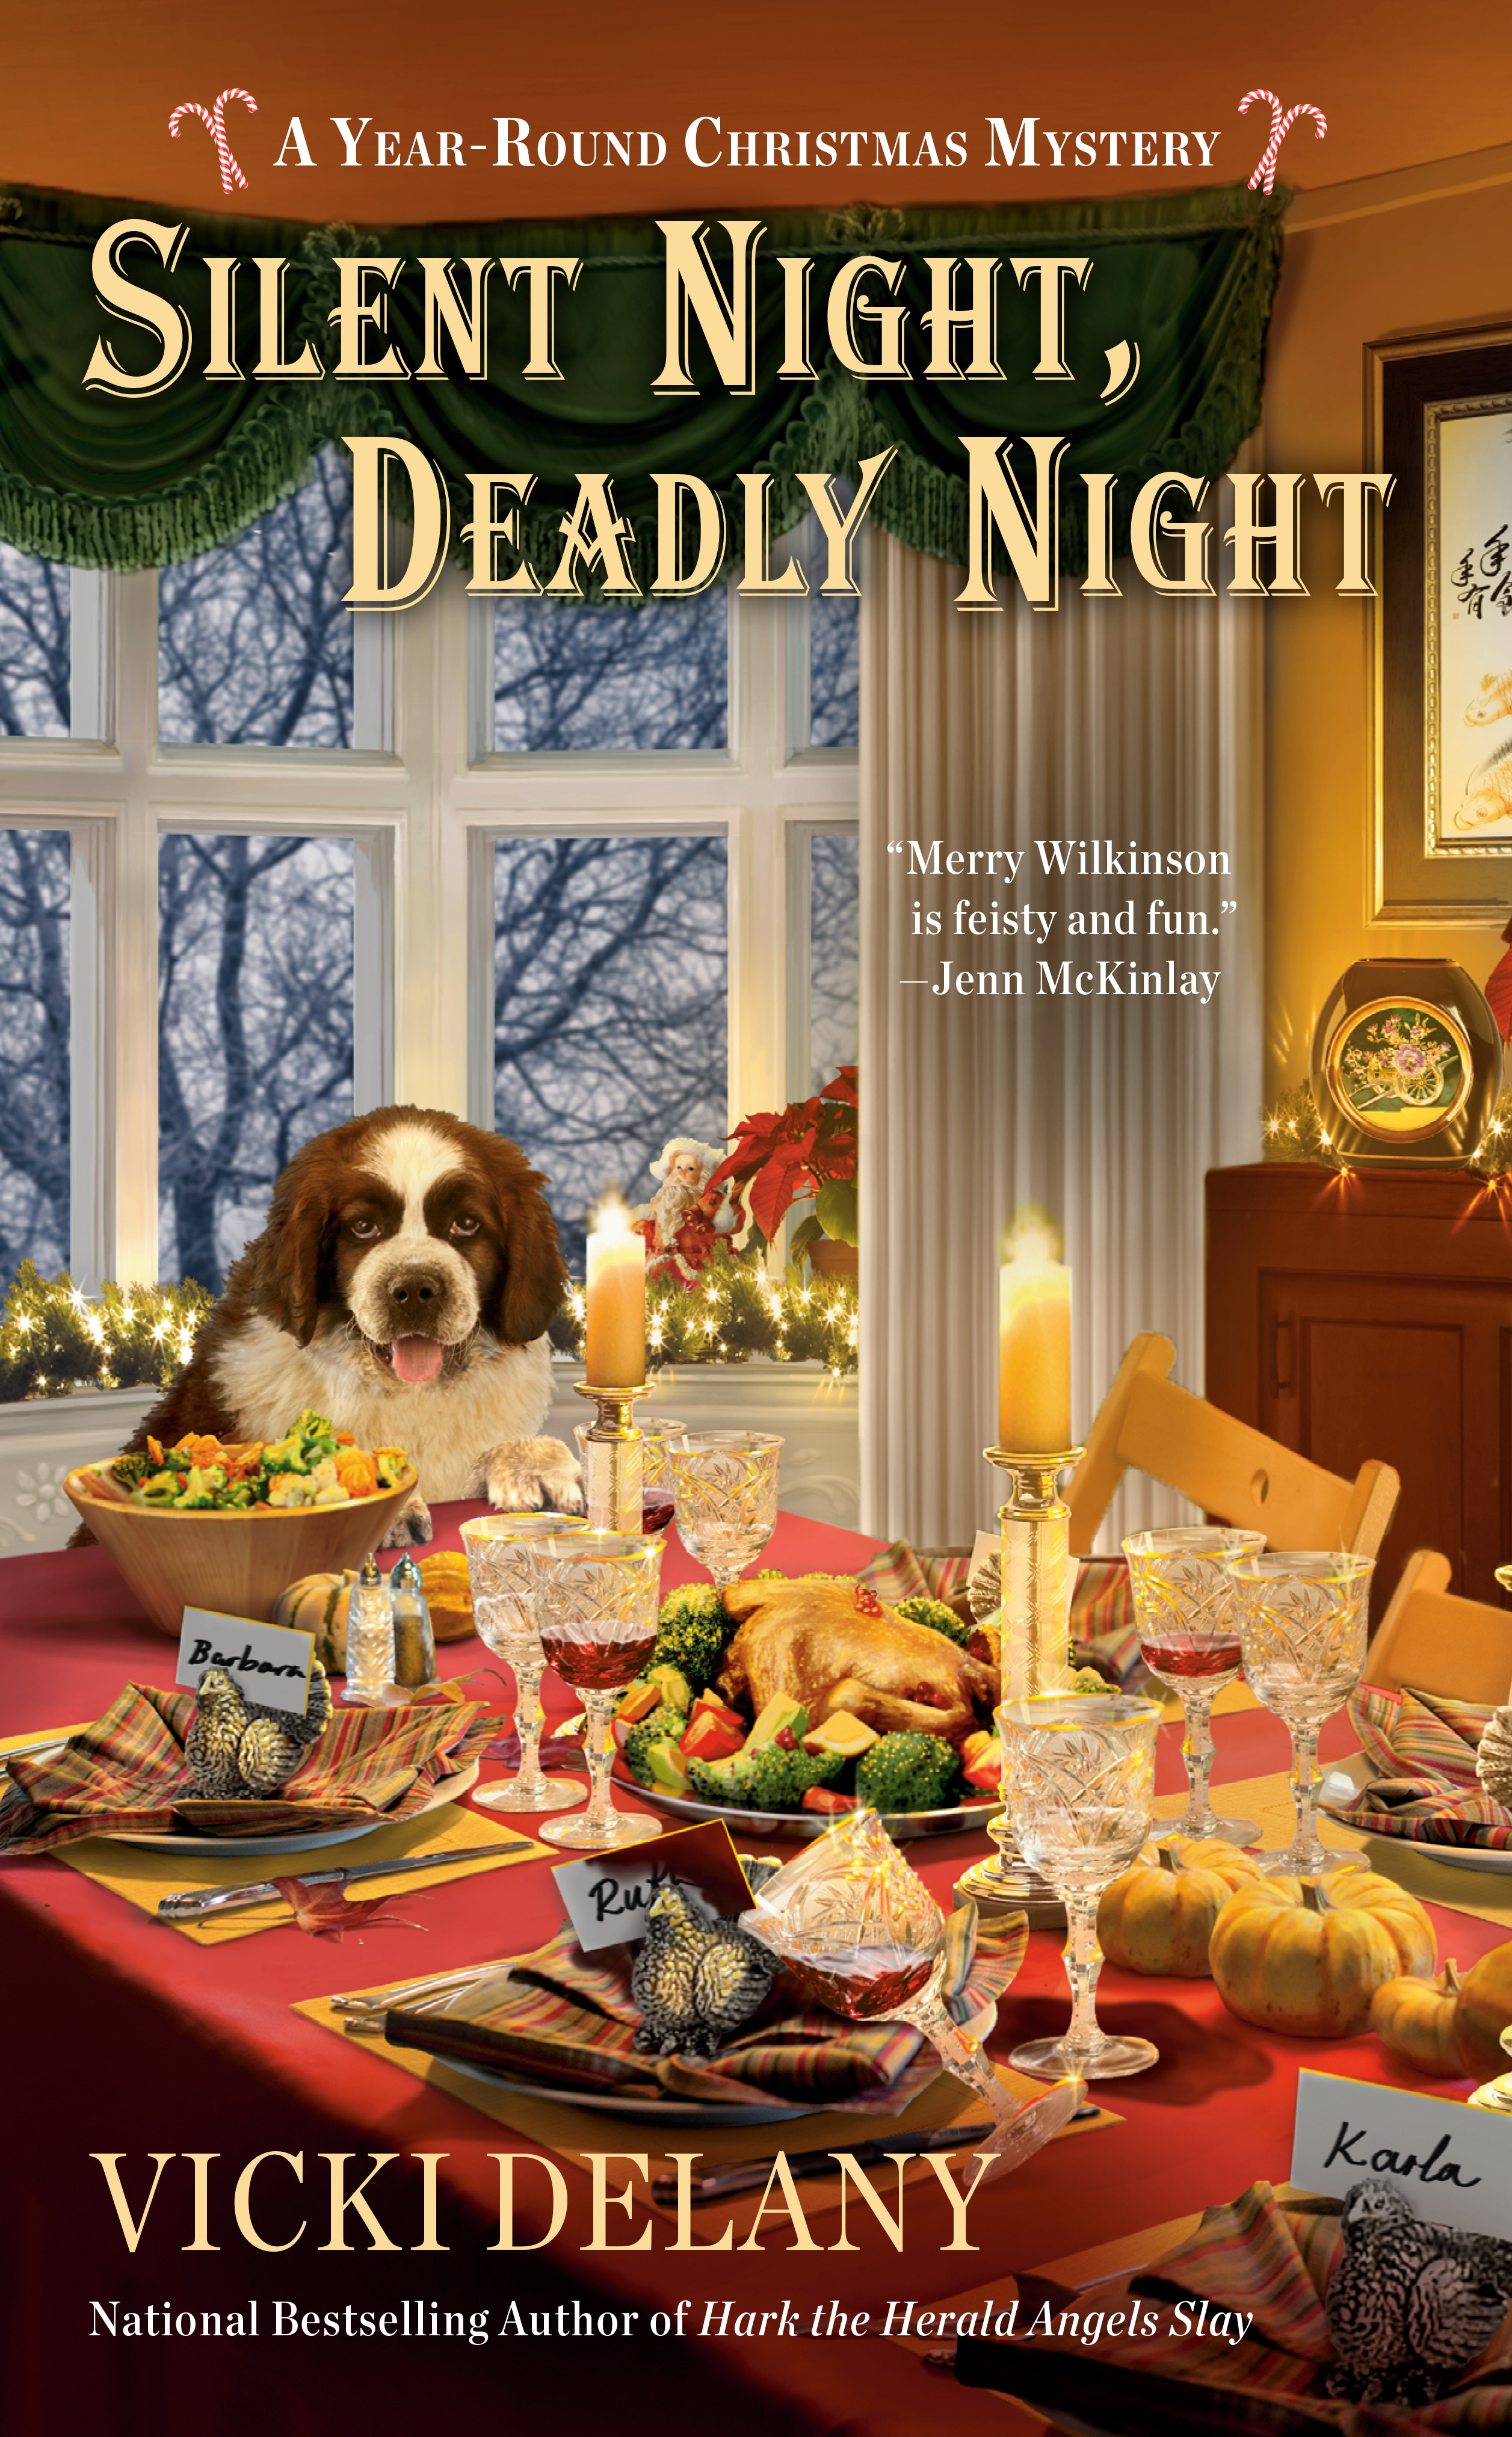 ISBN 9780440000310 product image for Silent Night, Deadly Night | upcitemdb.com